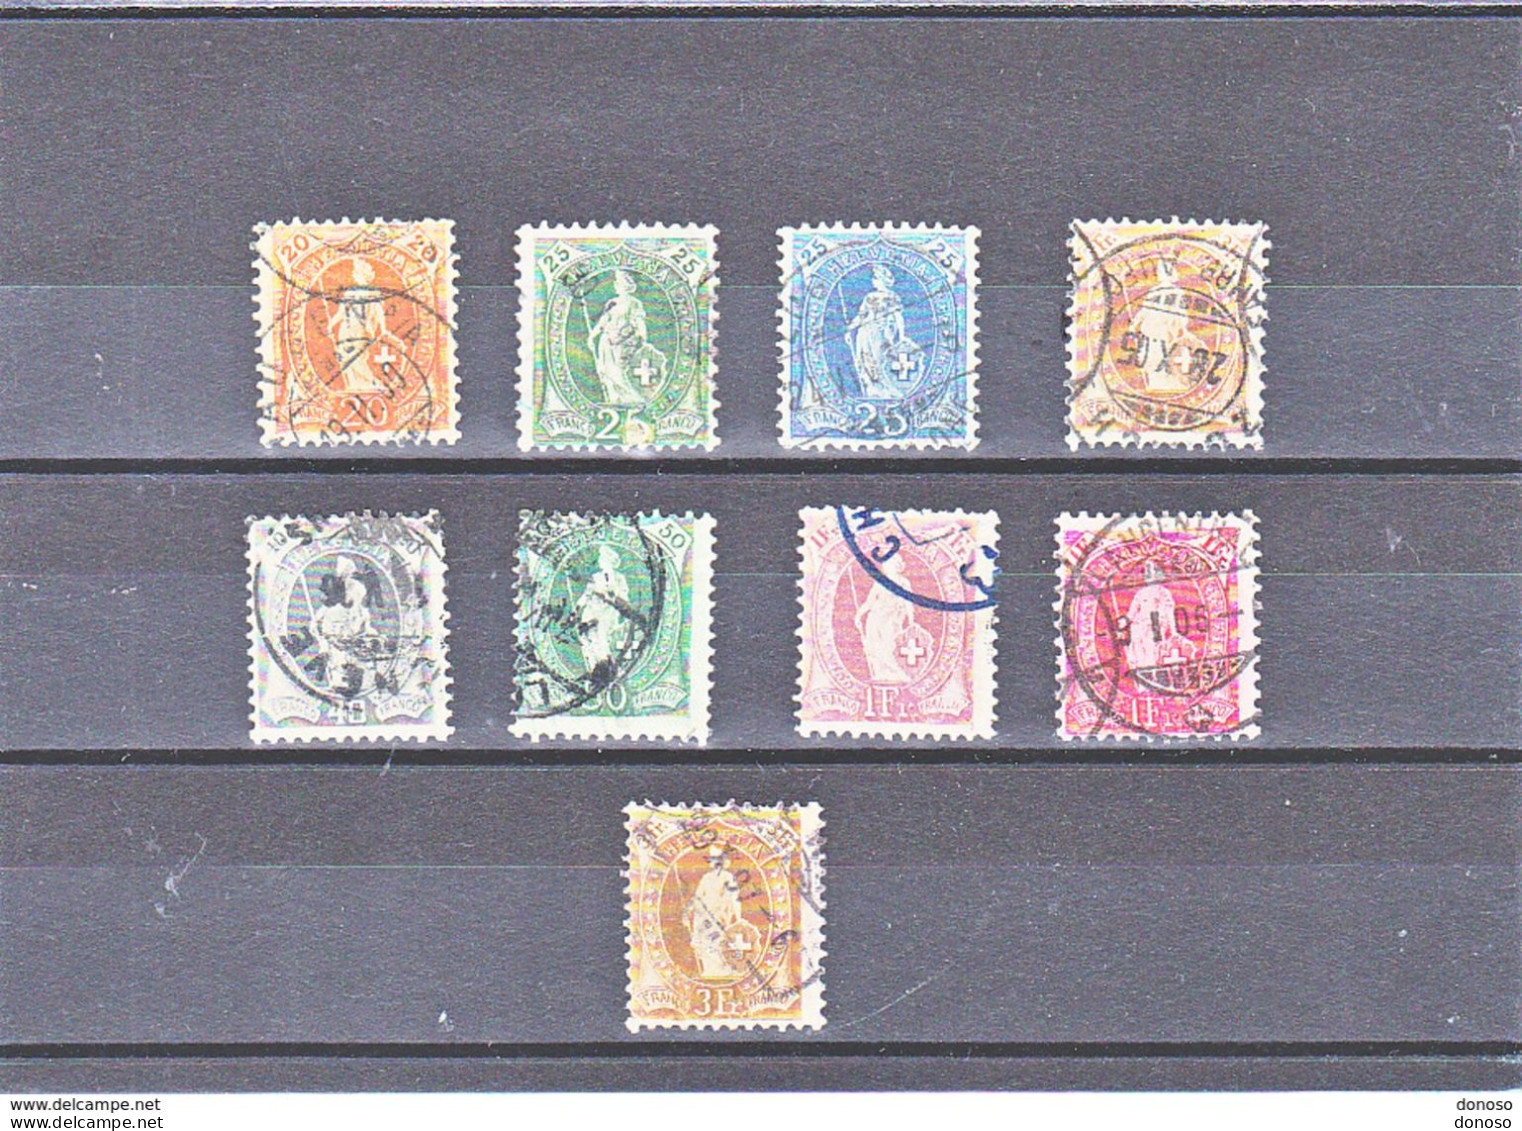 SUISSE 1882-1894 HELVETIA Yvert 71-75 + 77-80 Oblitérés, Used, Cote : 78 Euros - Used Stamps